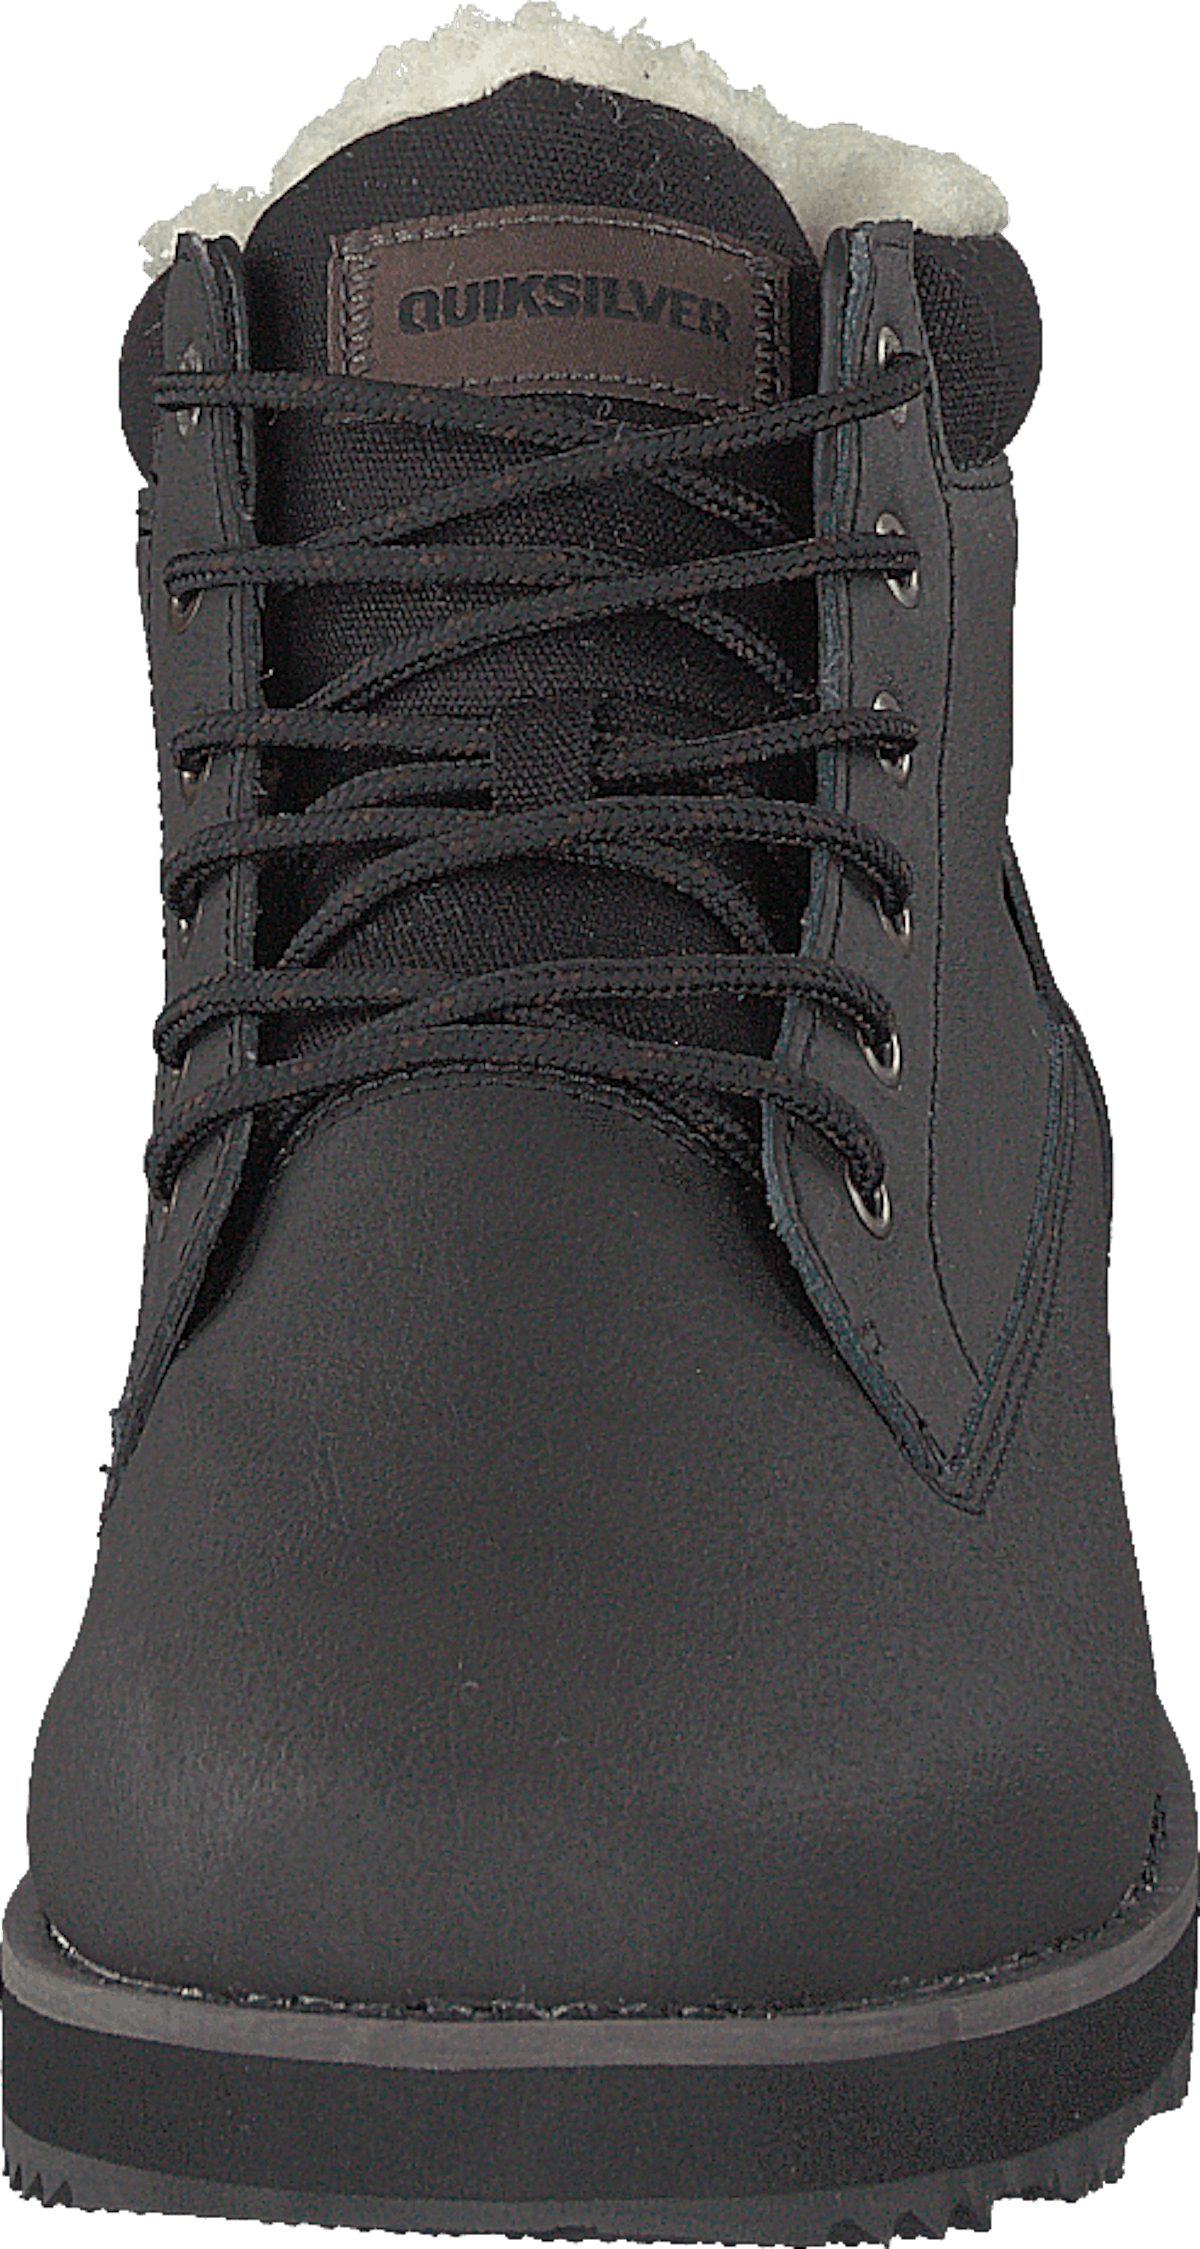 Mission Boot Solid Black